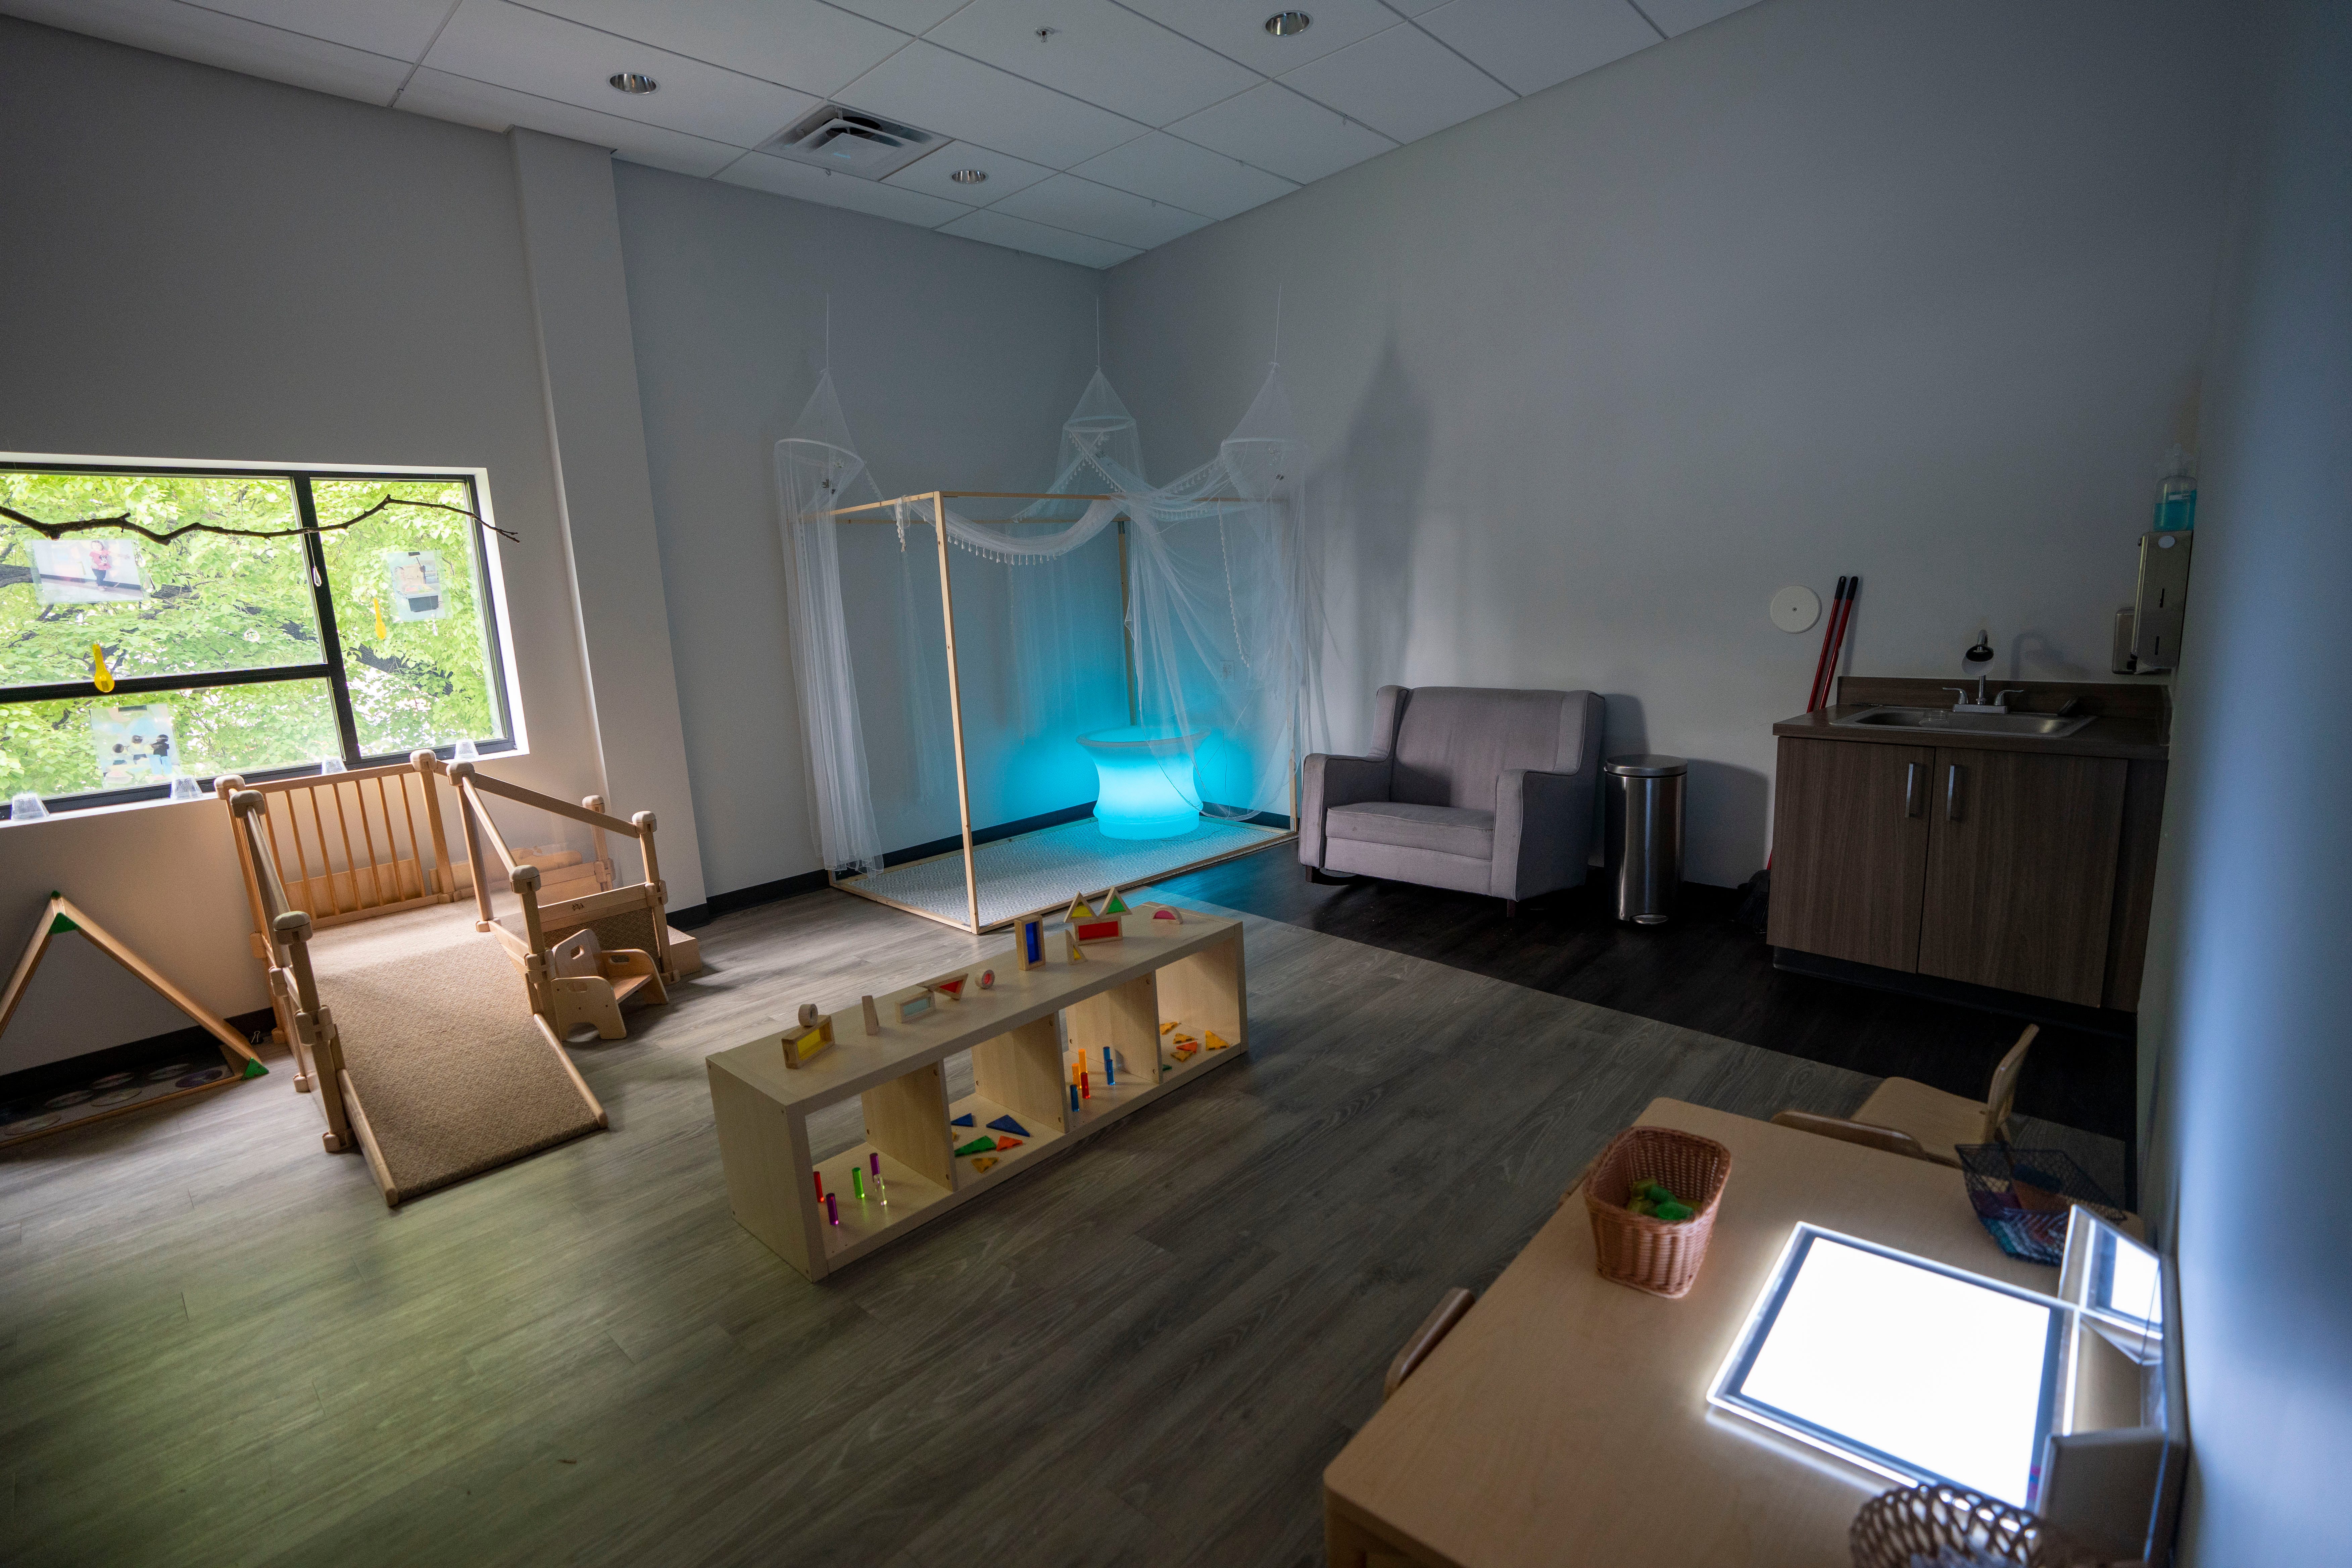 Sensory rooms, such as the light and shadow room, are part of the Urban Sprouts Child Development Center.